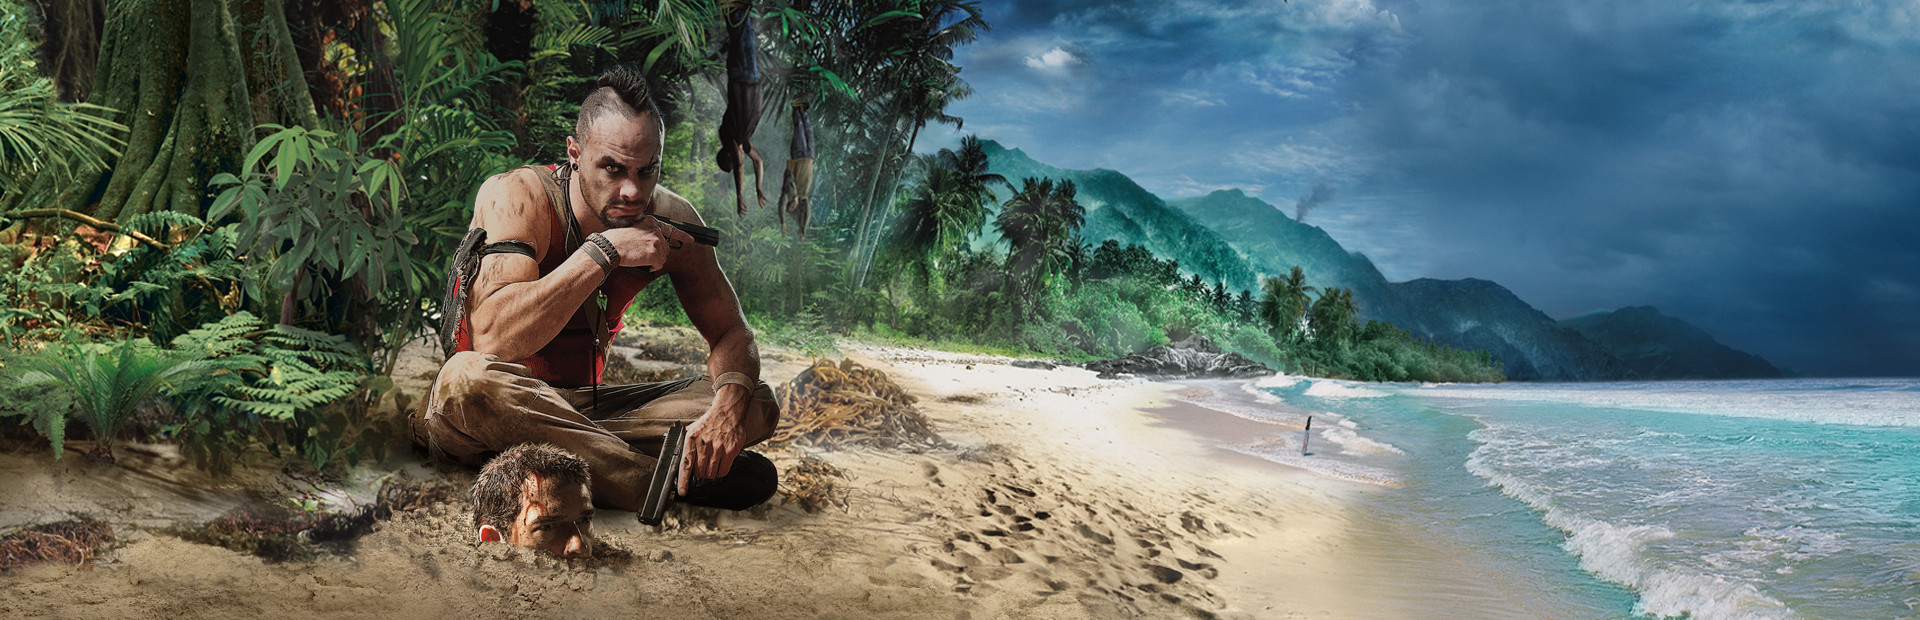 Far Cry 3 cover image